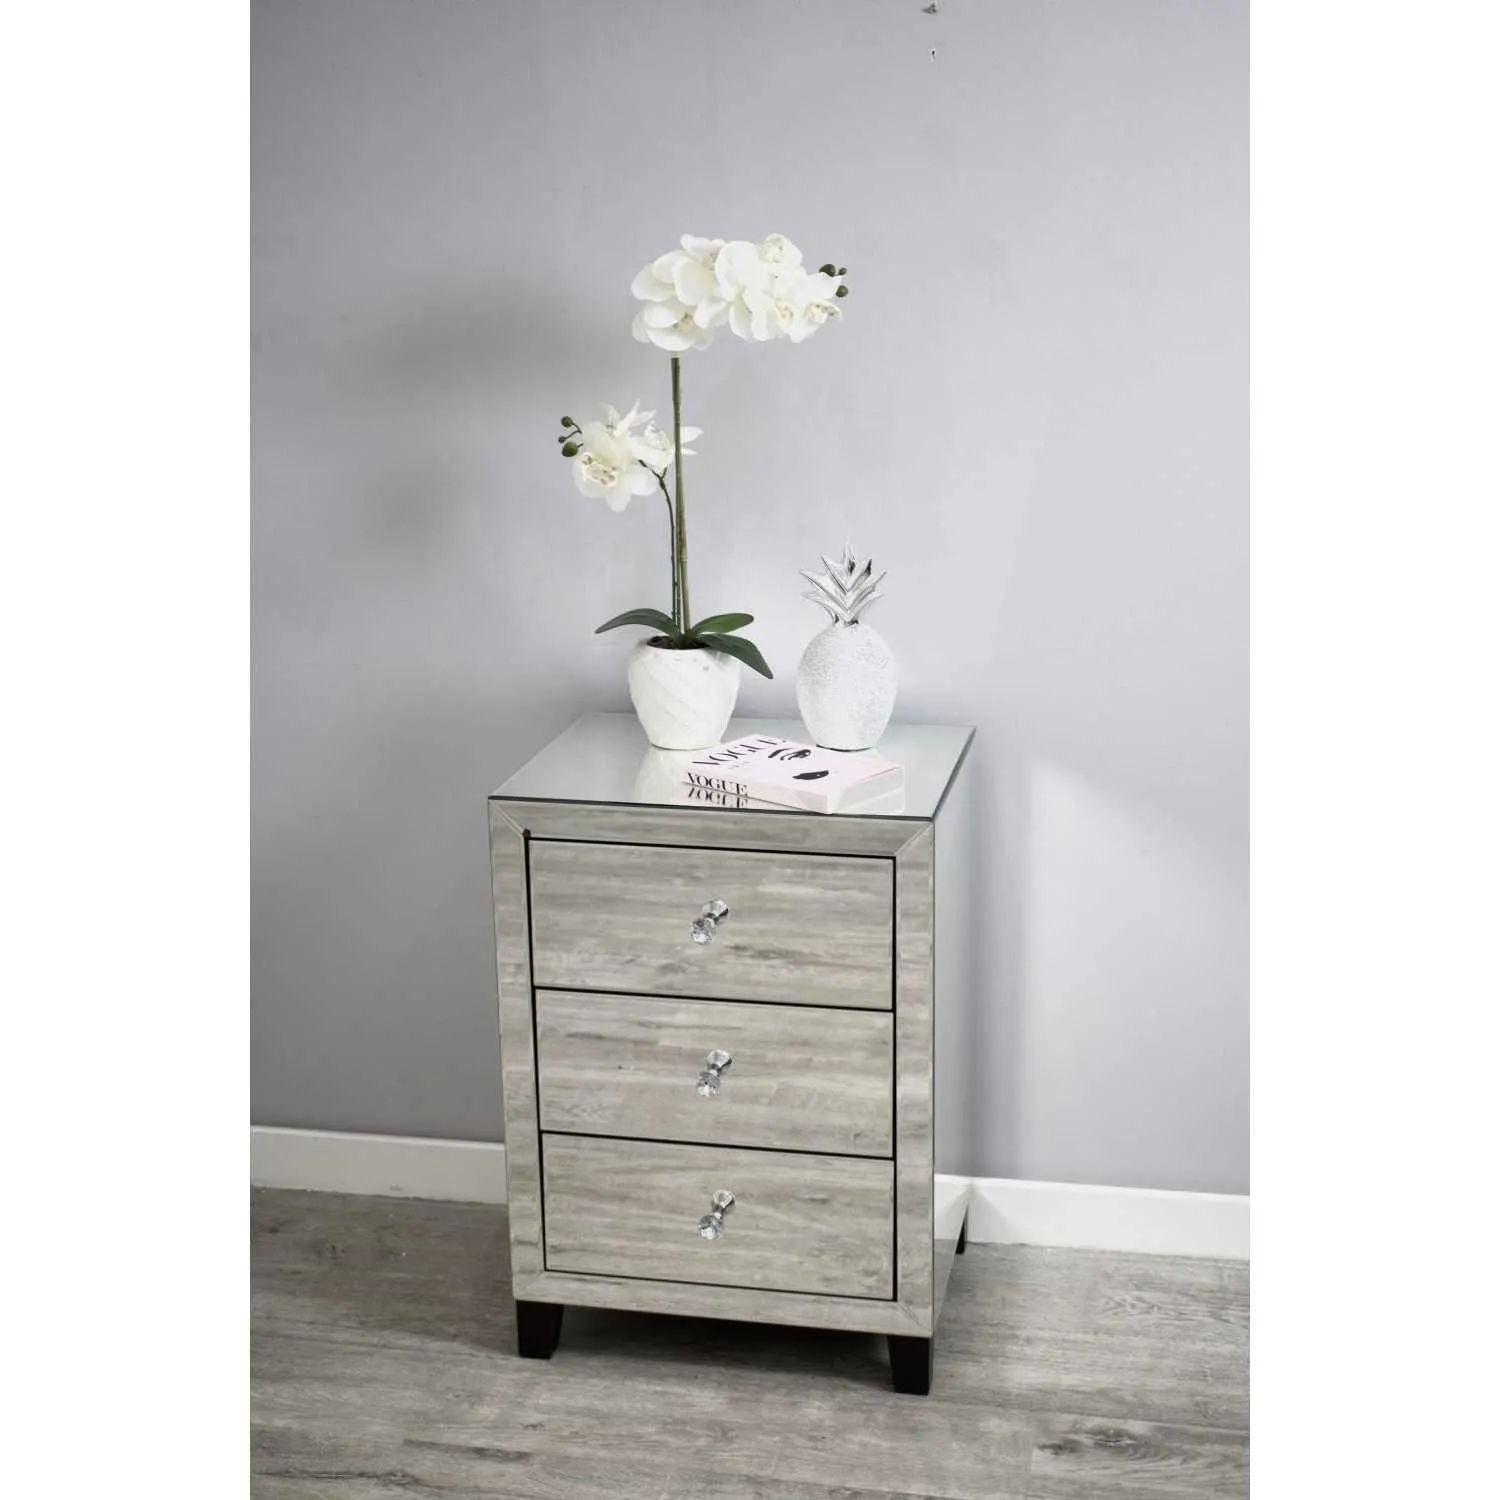 Luxe Simply Mirror 3 Drawer Bedside Cabinet